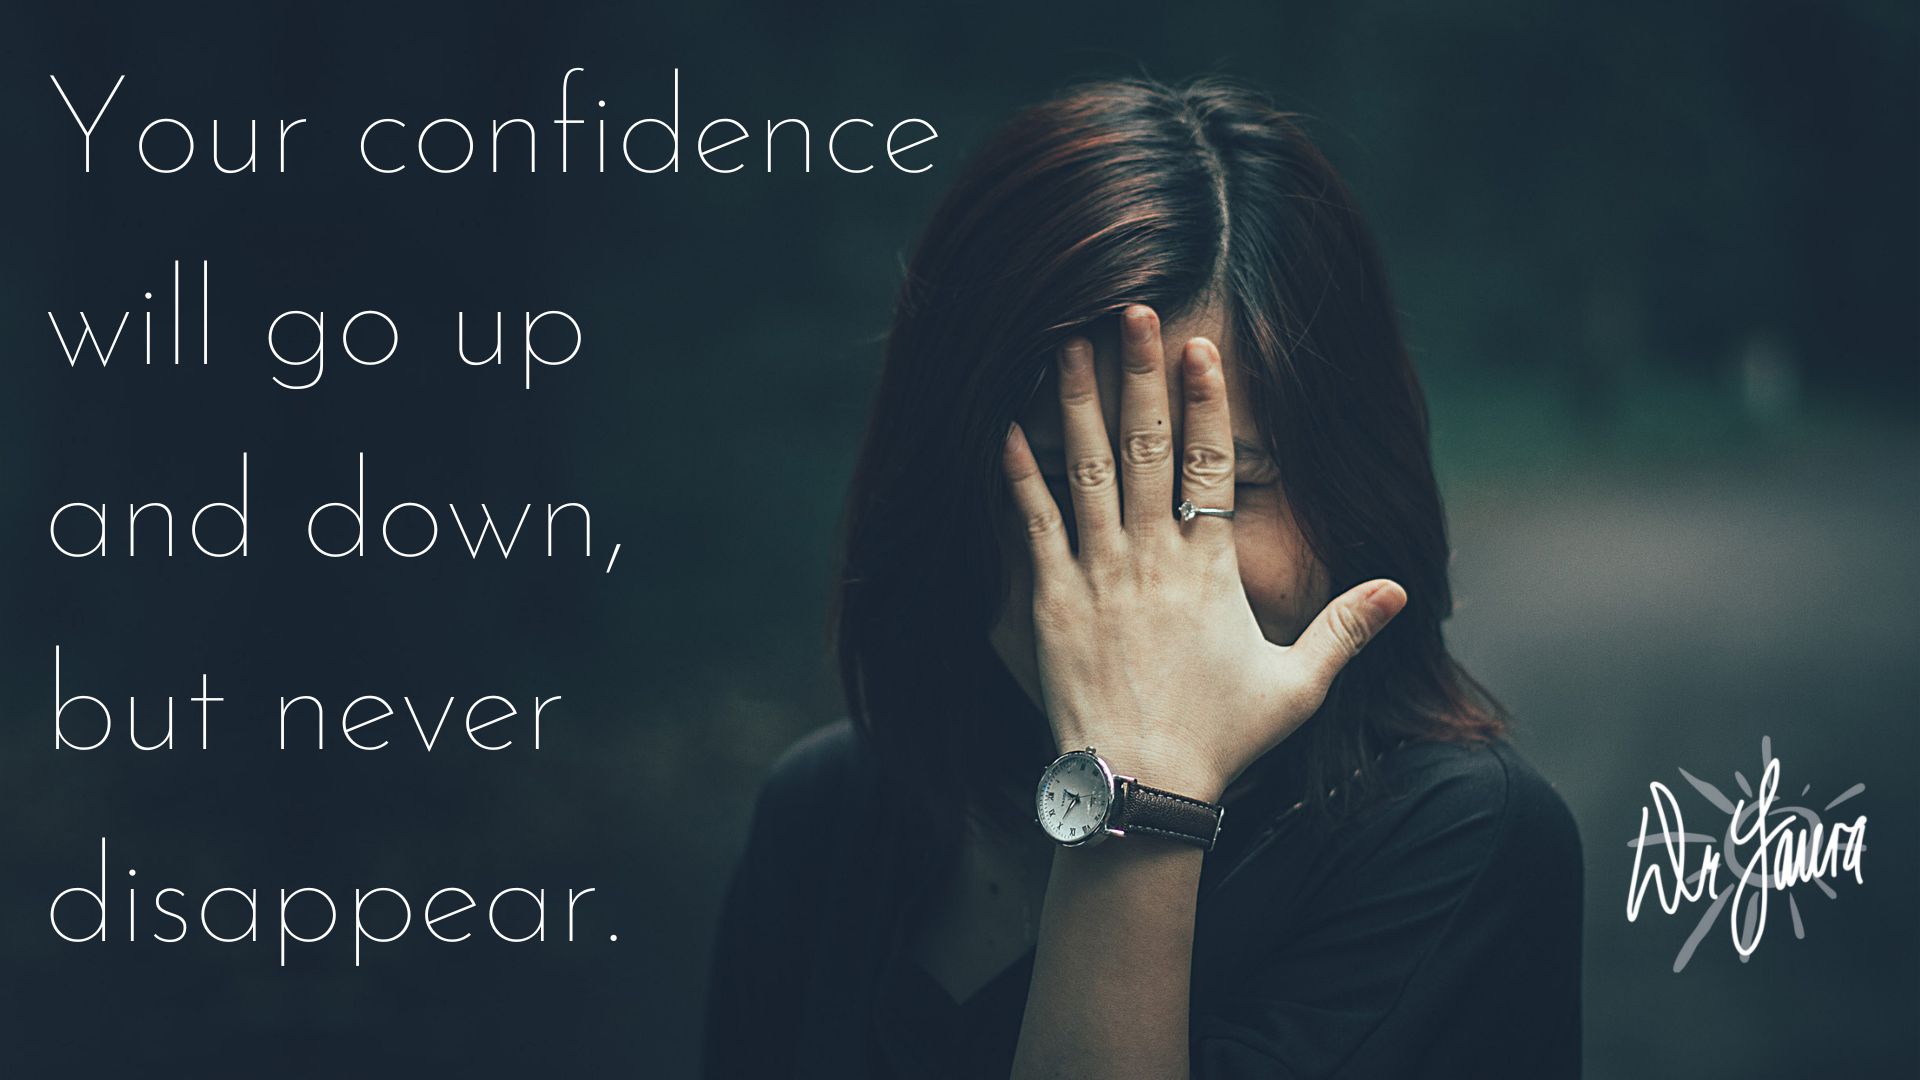 Blog: Why You’re Losing Confidence in Yourself